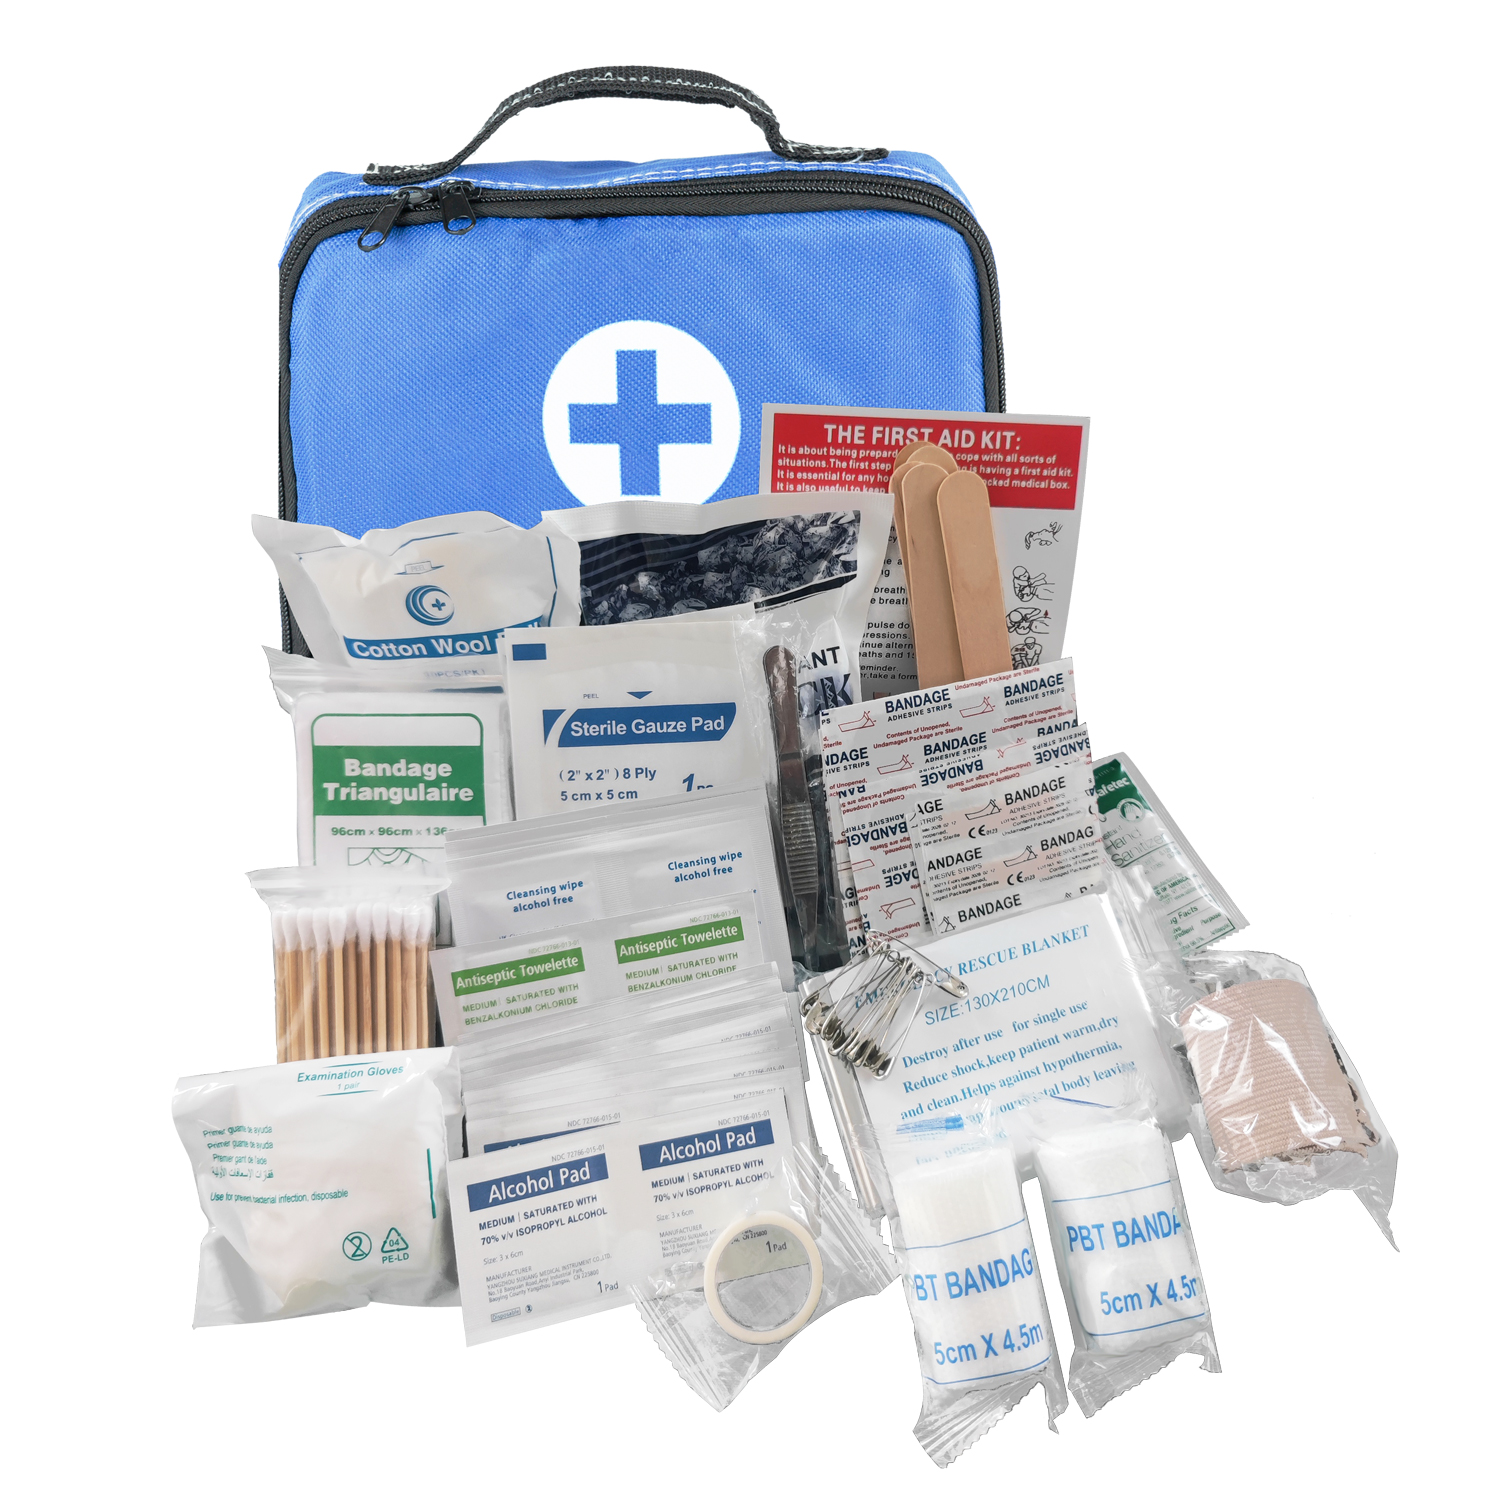 Correct use and understanding of the tools in the first aid kit